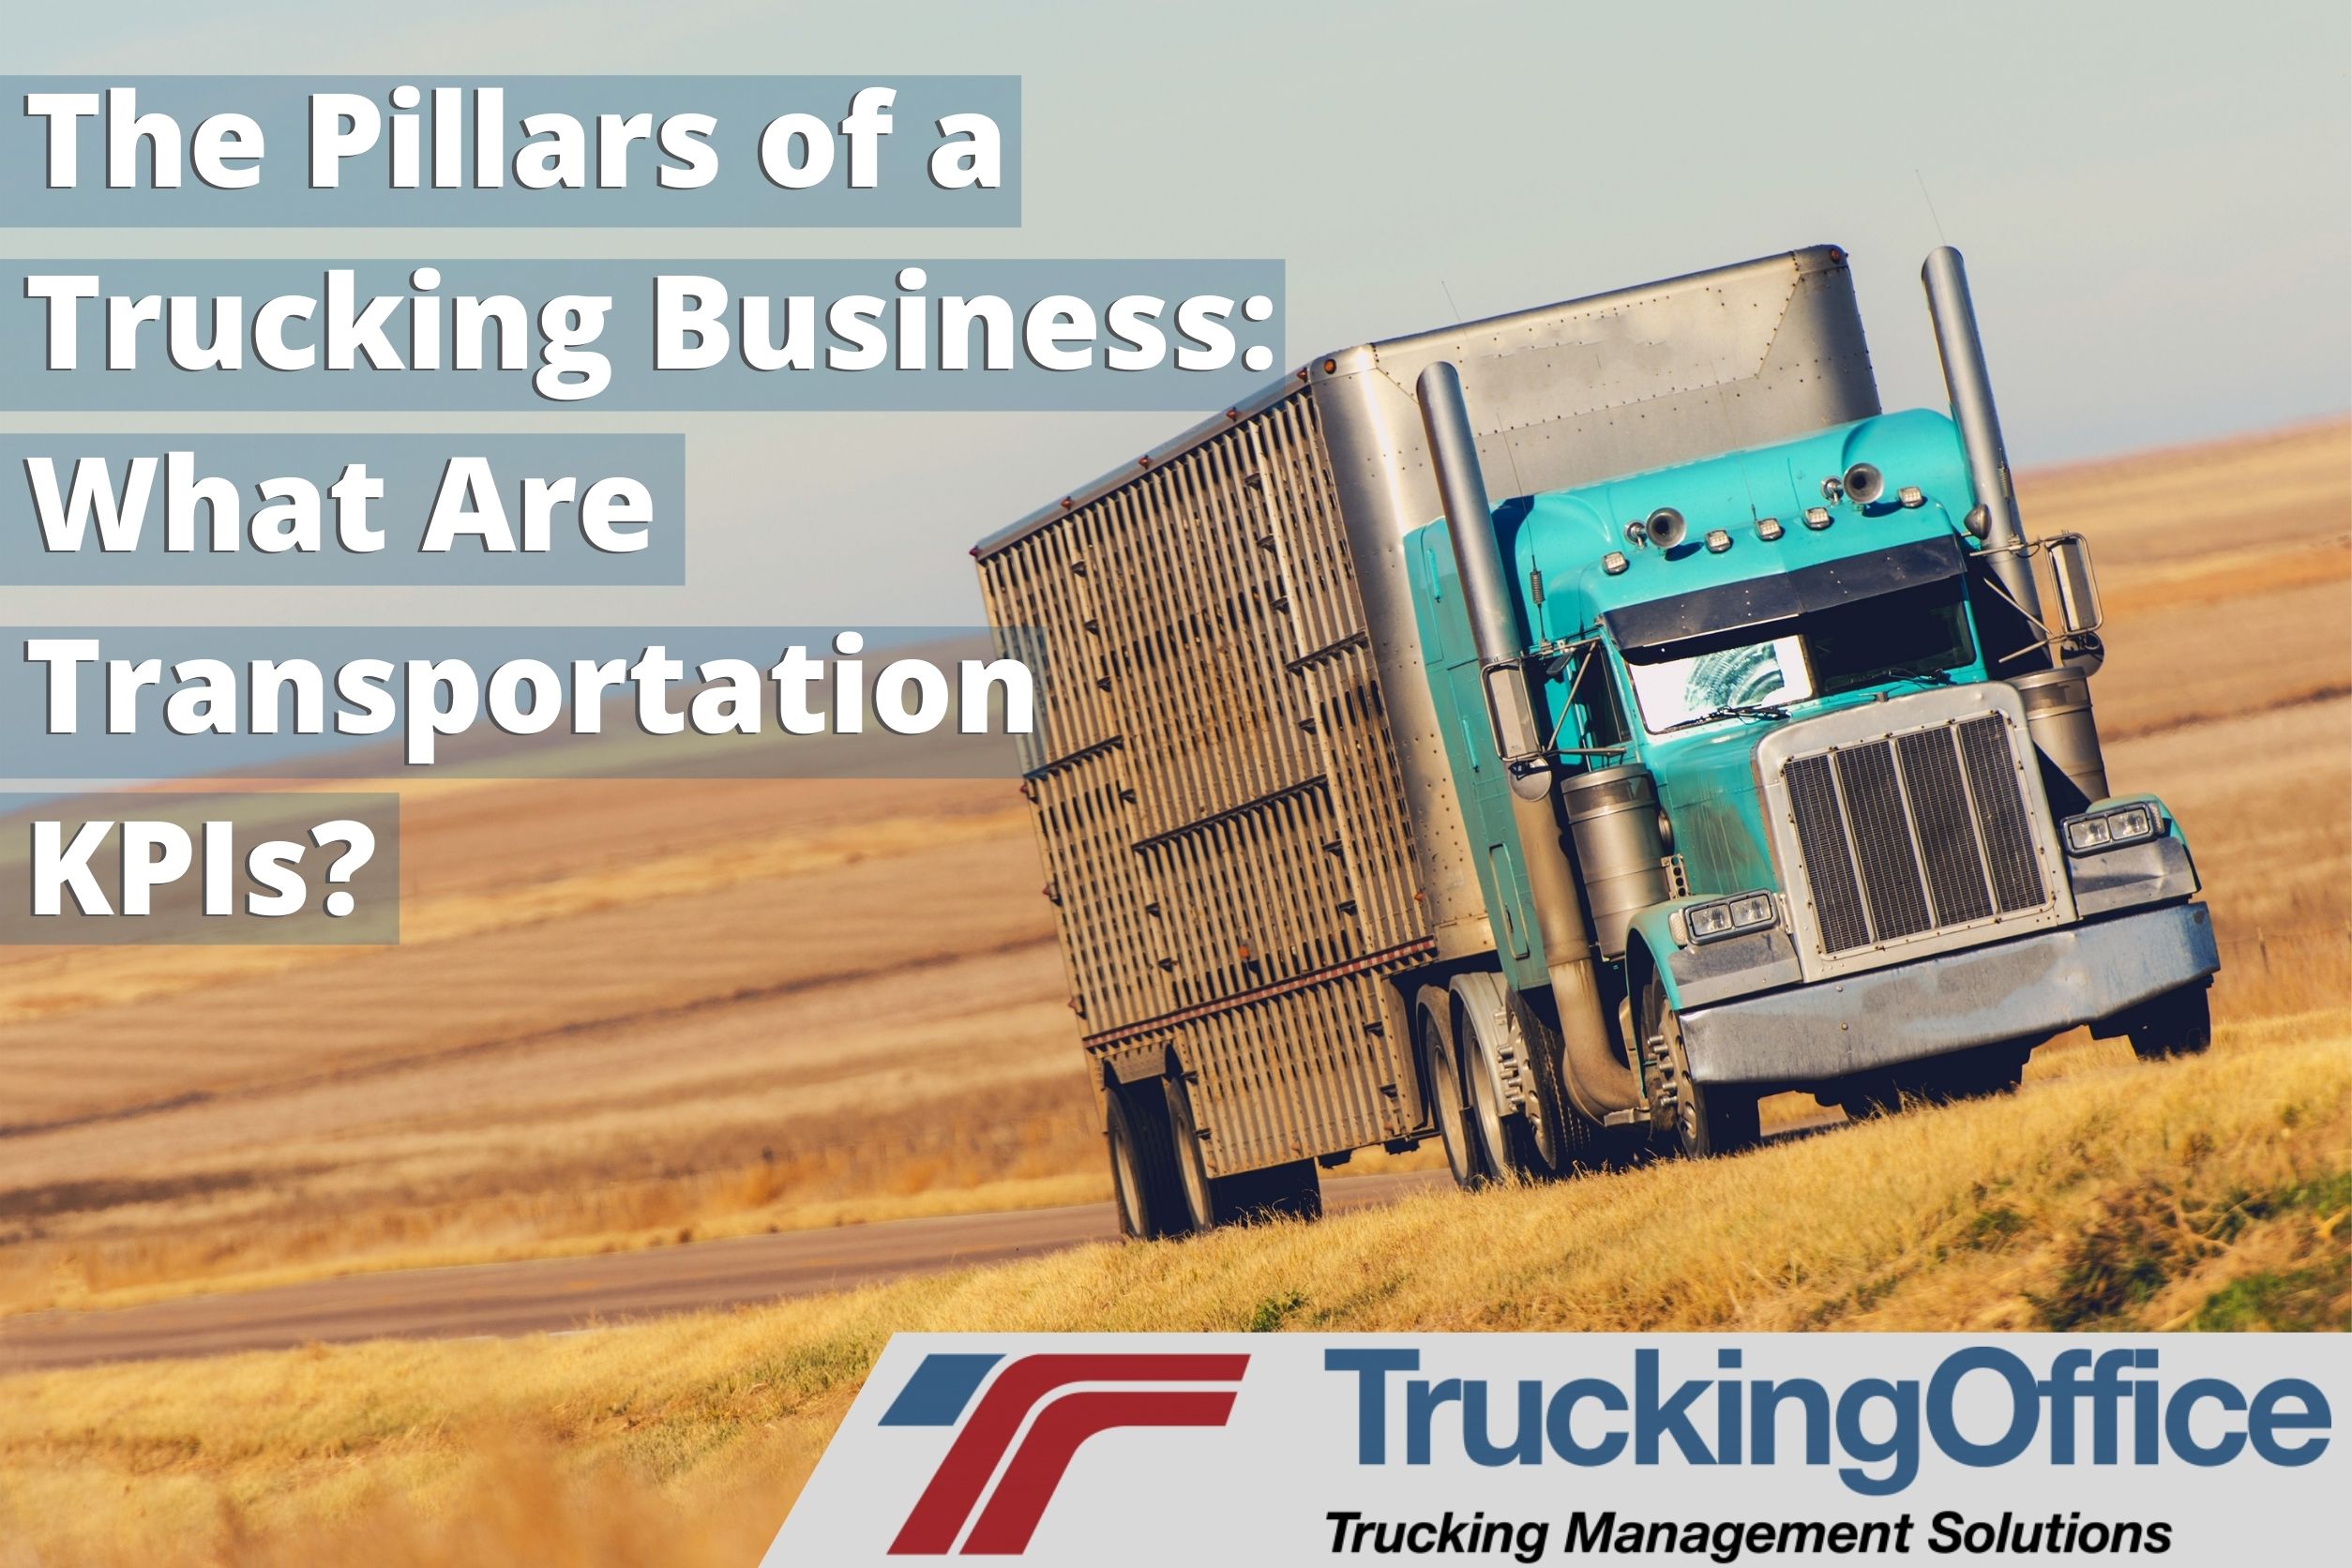 The Pillars of a Trucking Business: What Are Transportation KPIs?